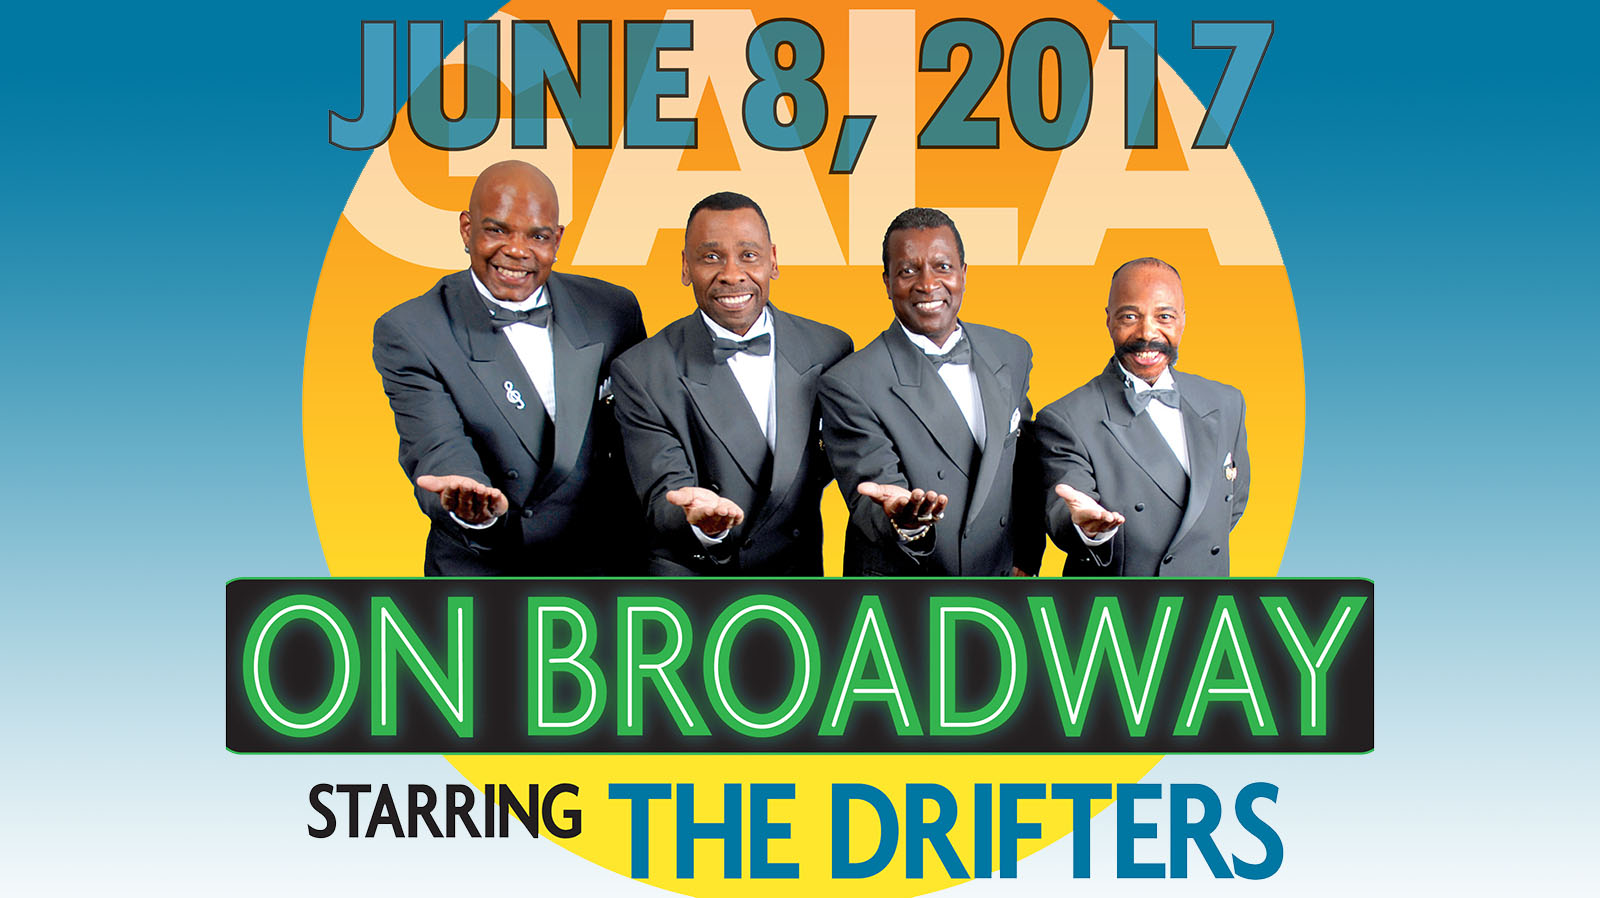 Rock & Roll Hall of Famers The Drifters To Headline Algonquin Arts Theatre Gala